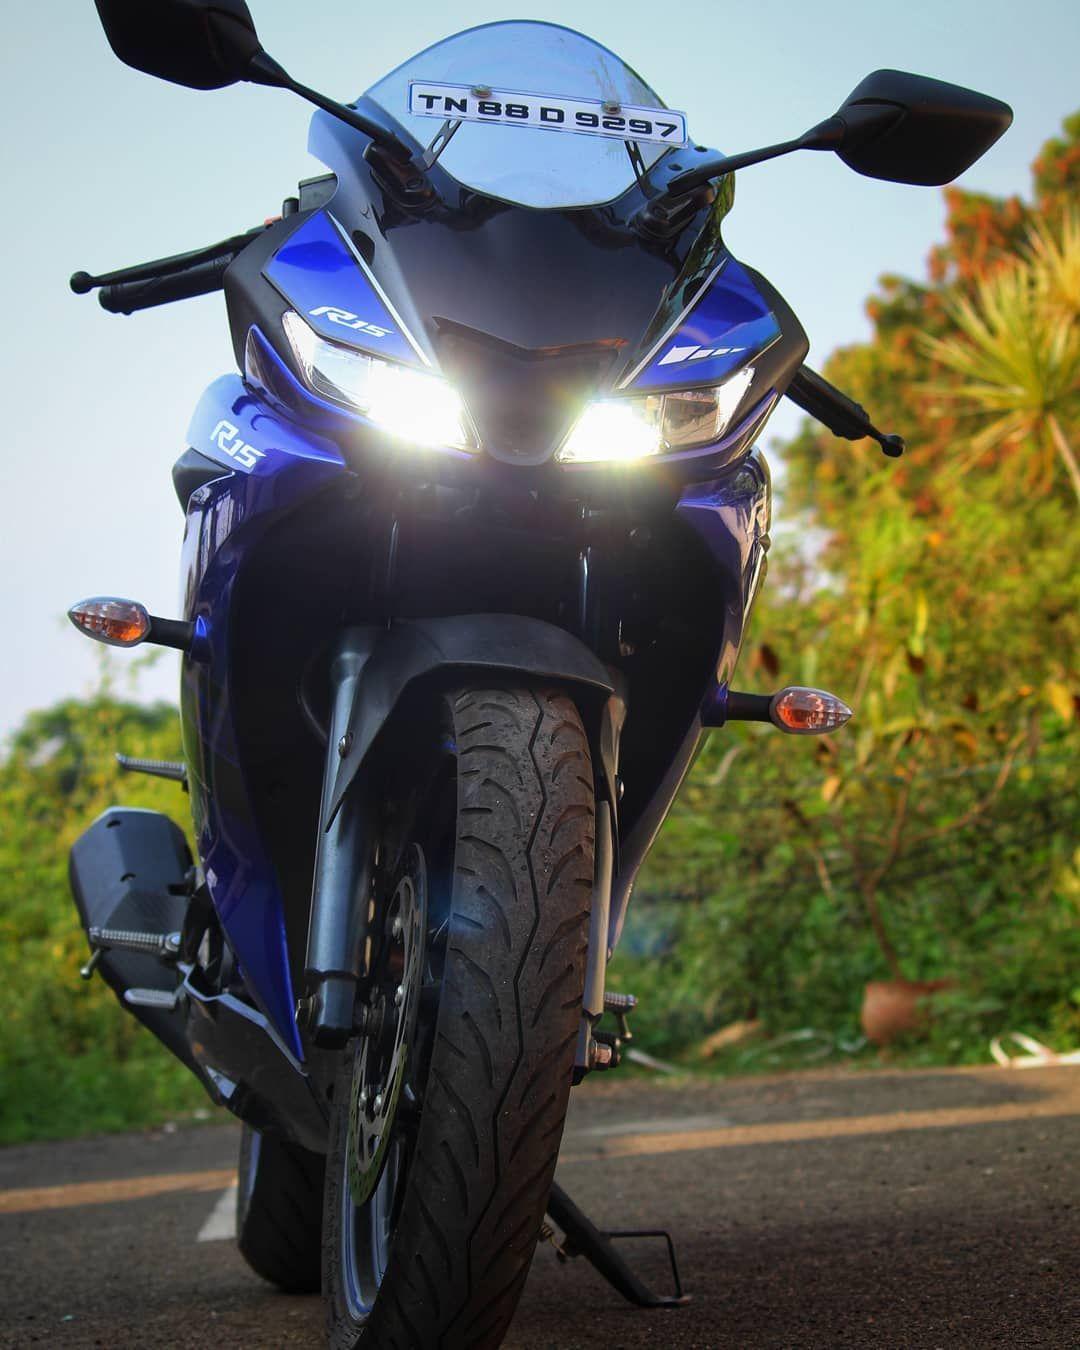 Follow: Share our page more: Picture By: DM your bike pic #yamaha #r15 #r1. Bike pic, Bike photohoot, Yamaha bikes